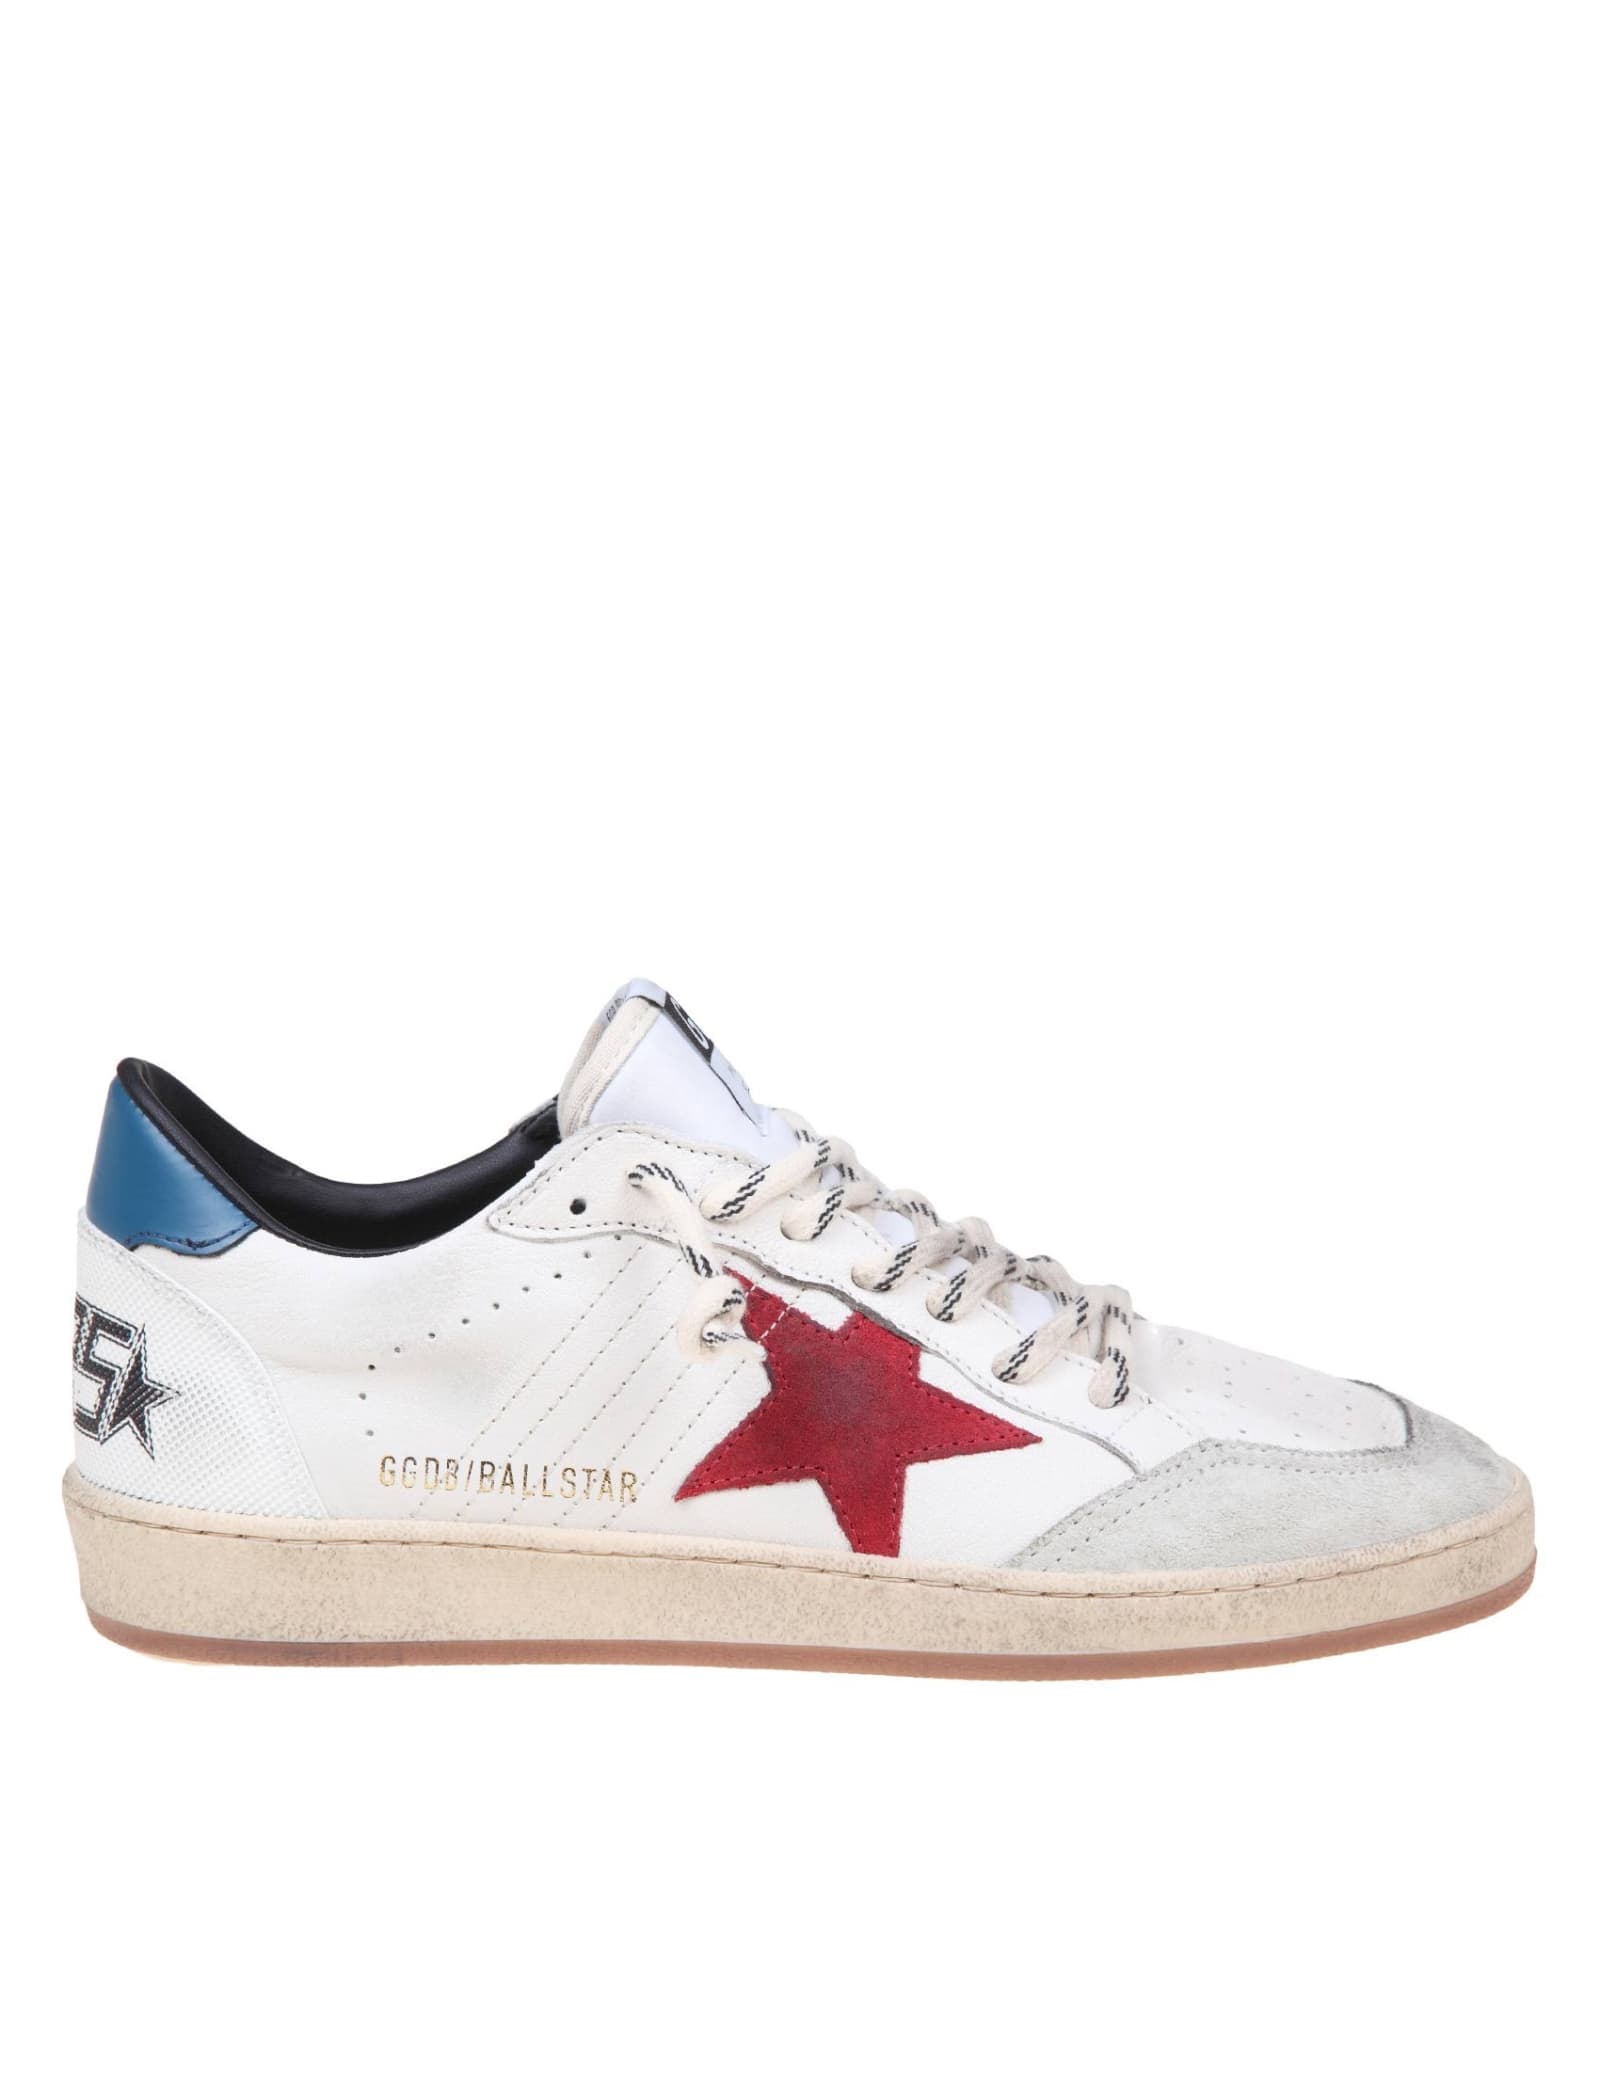 Shop Golden Goose Ballstar Sneakers In White Leather And Suede